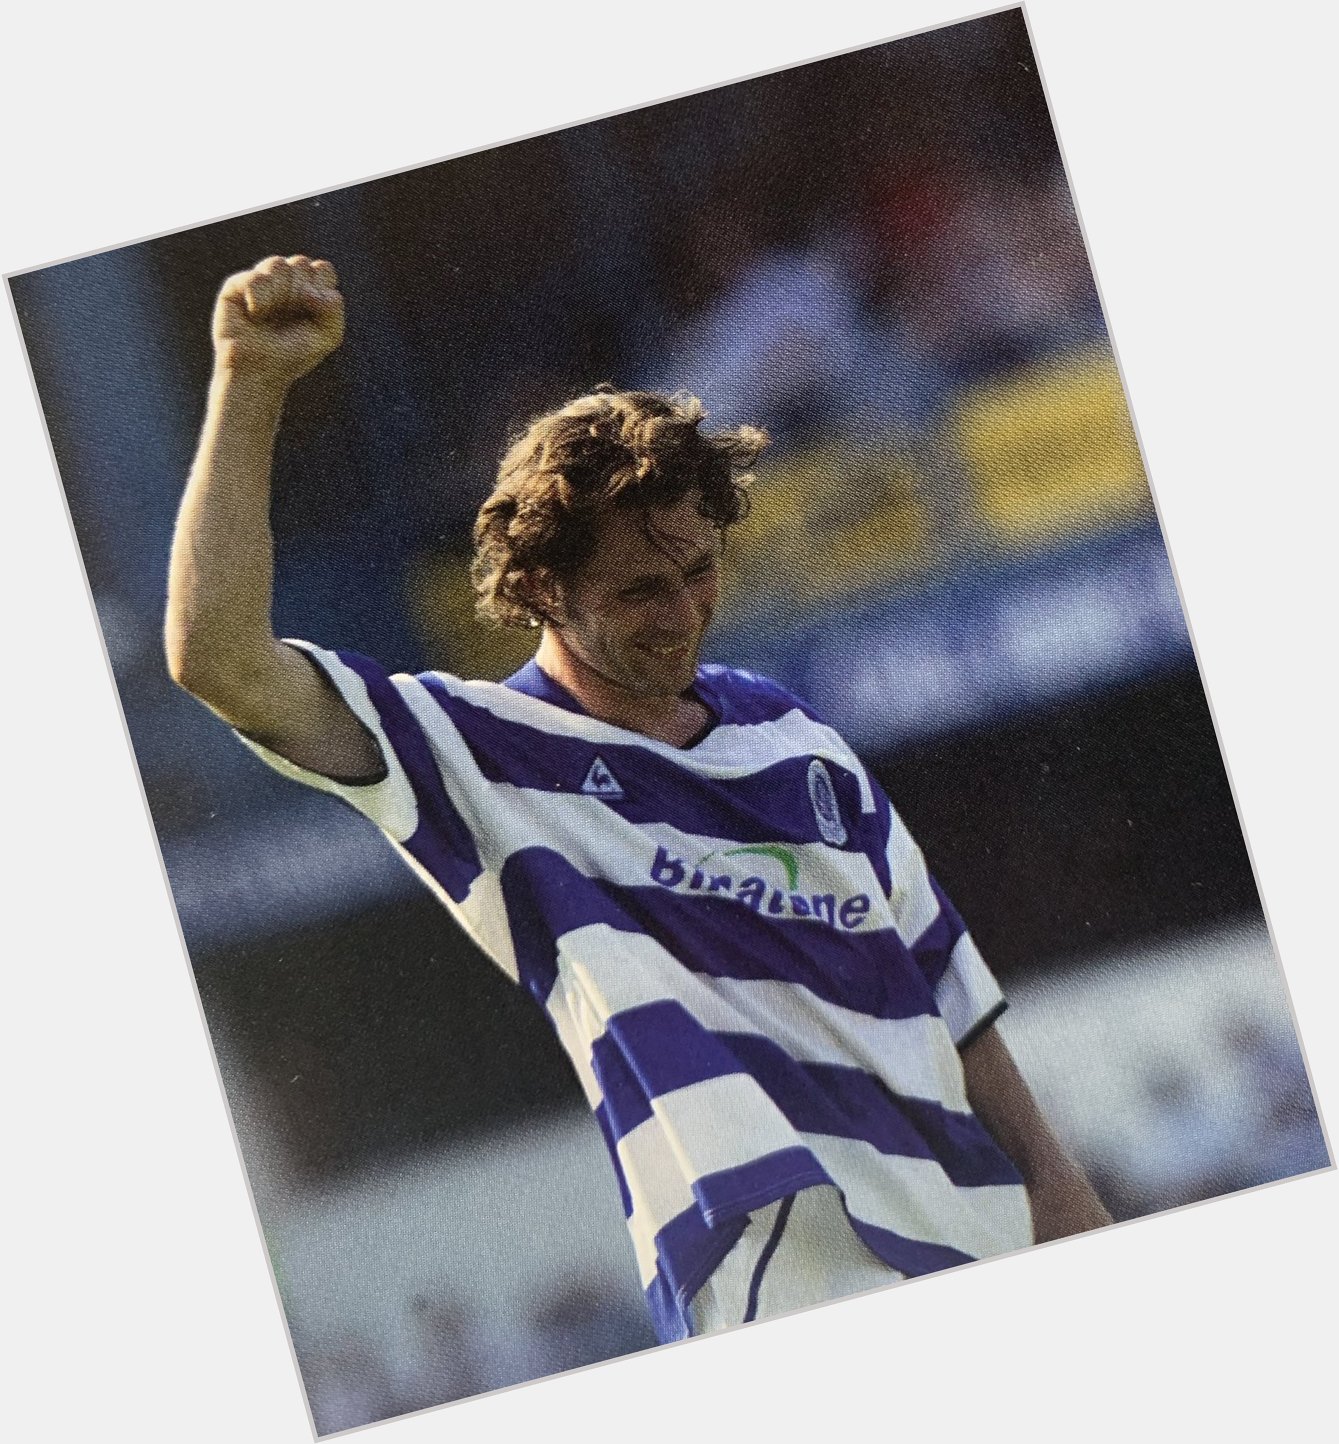  A Very Happy Birthday to Gareth Ainsworth, who turns 49 today. 